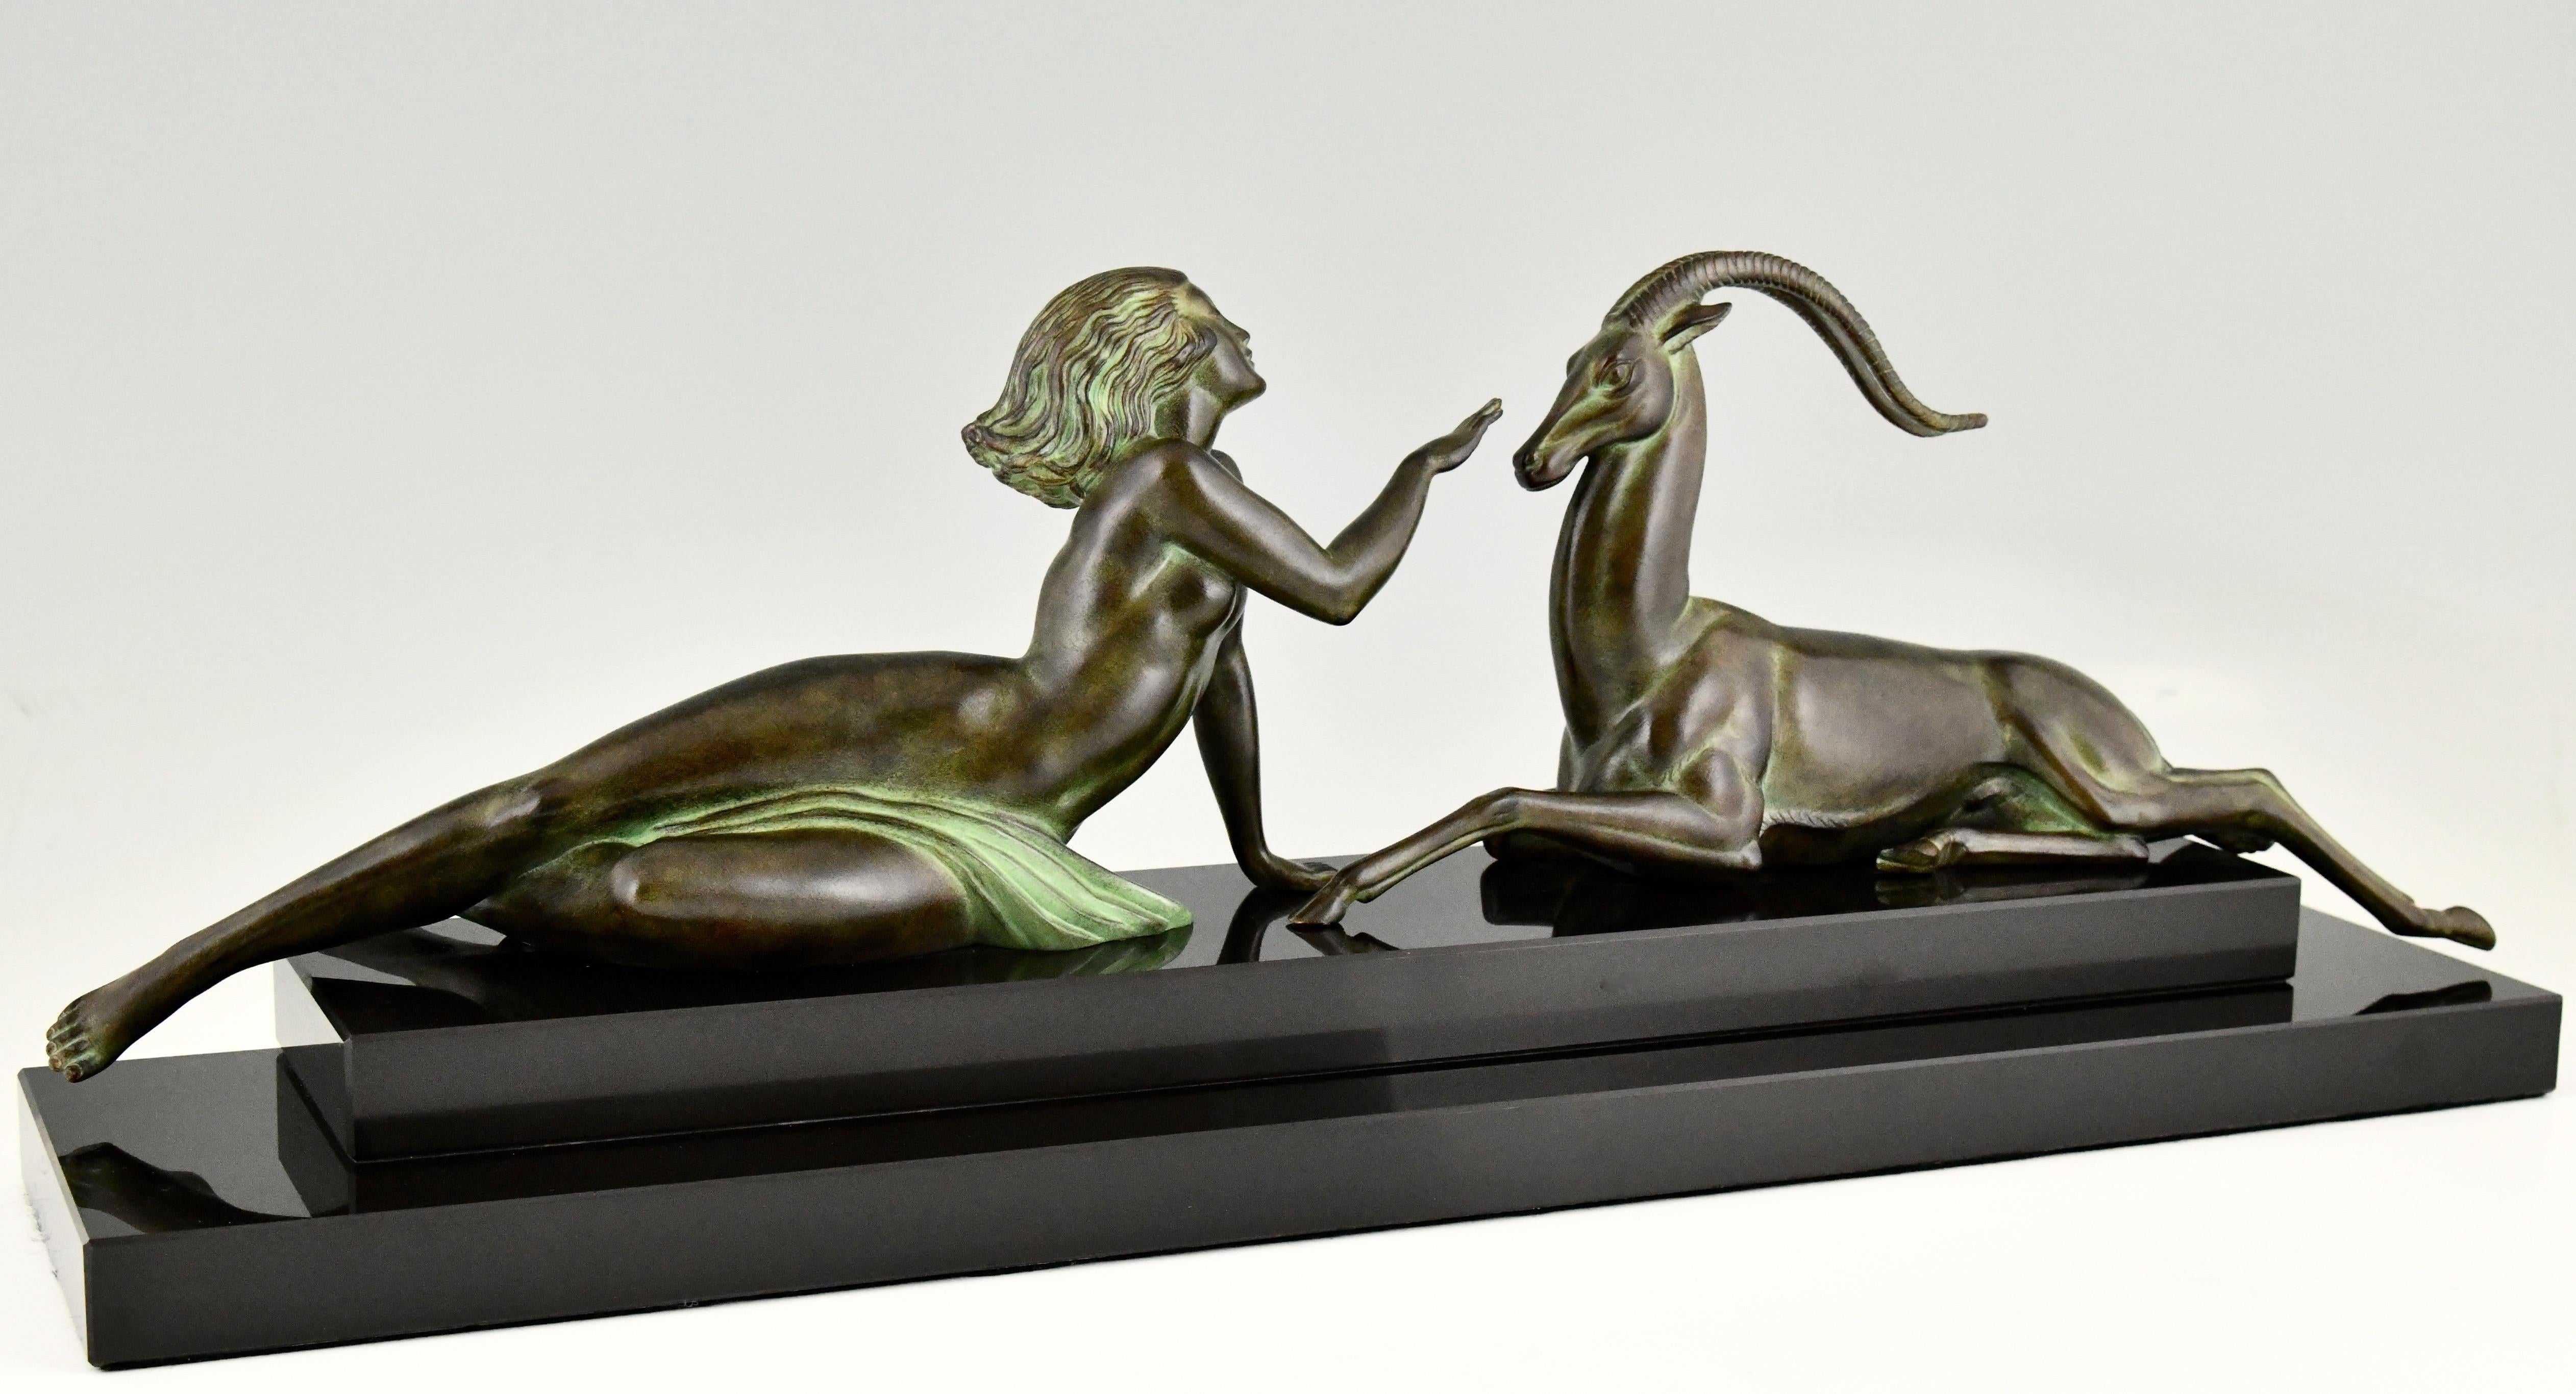 Seduction, elegant sculpture in Art Deco style of a nude lady with gazelle by Pierre Le Faguays for Max Le Verrier, signed Fayal and with foundry seal. 
Art metal with dark green patina on a black marble base. 

This model is illustrated in several